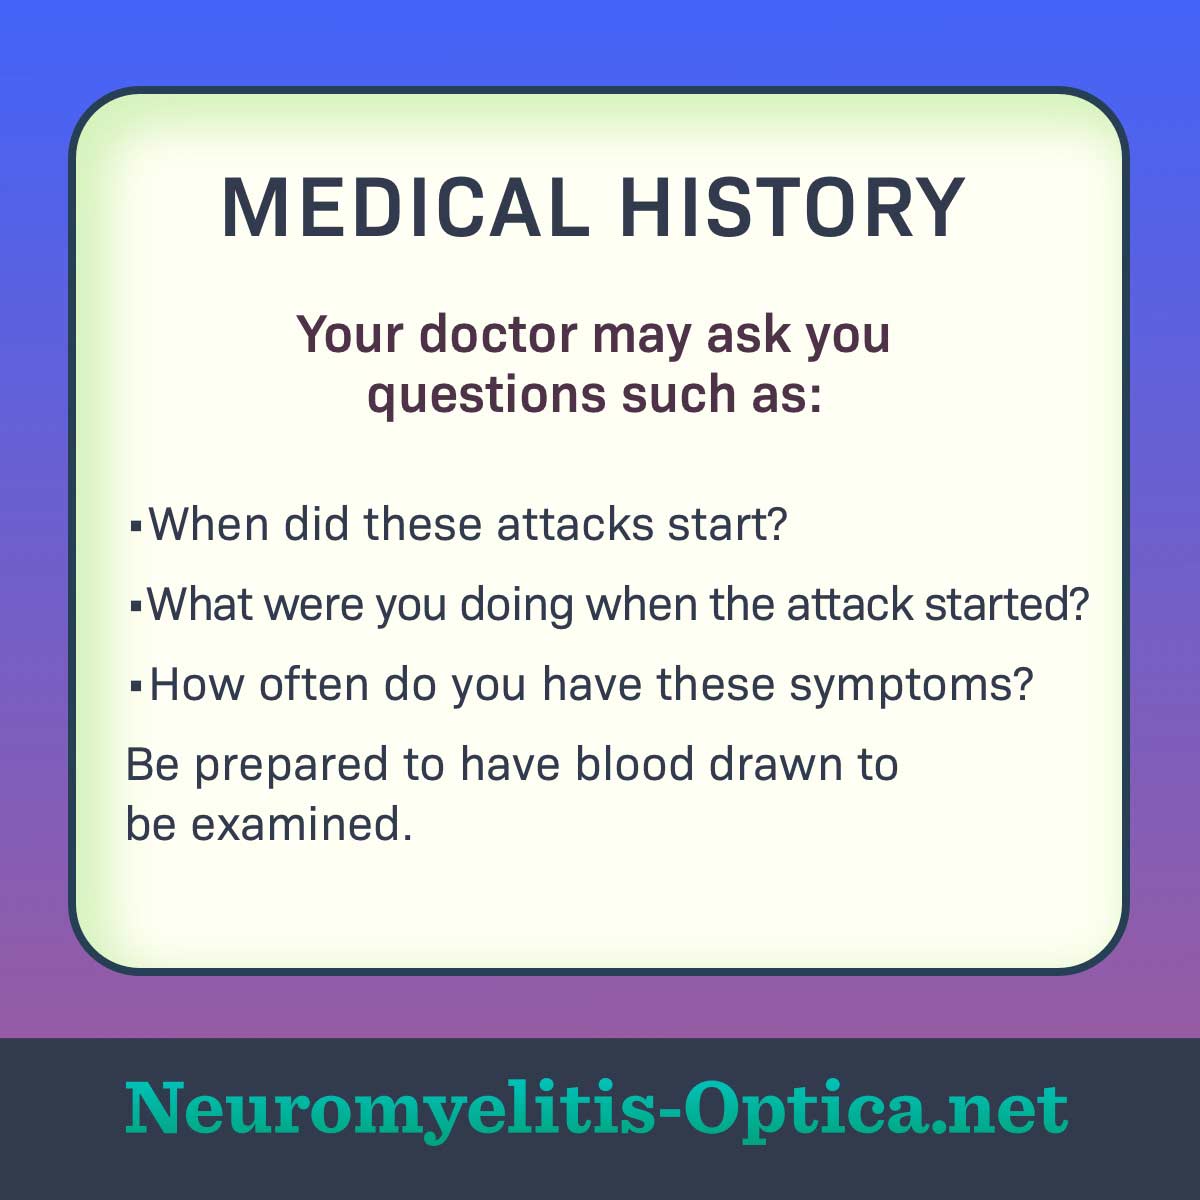 A chart highlighting key questions your doctor may ask about your medical history.